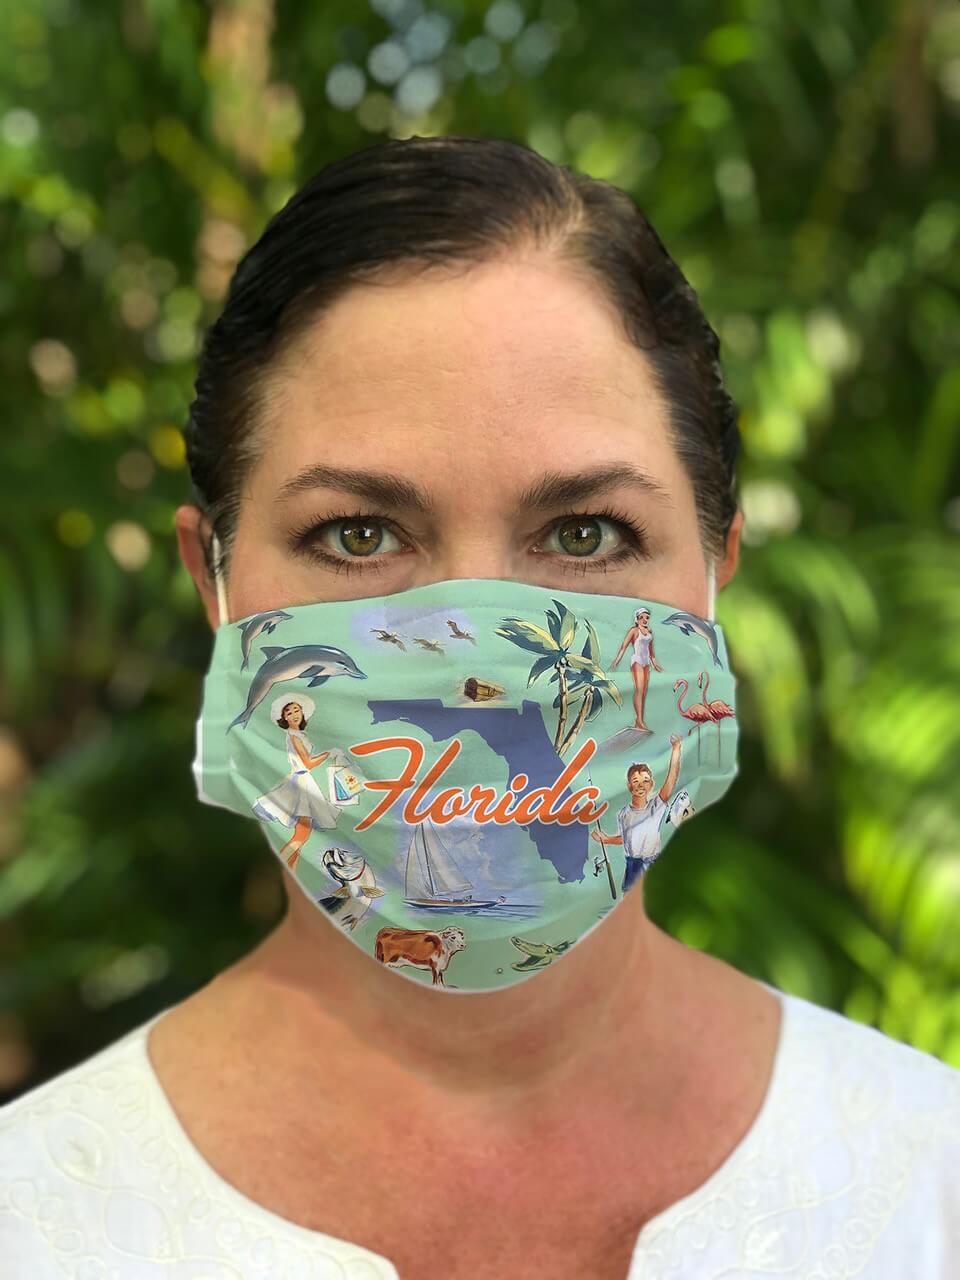 Photo of a woman wearing a Florida face mask